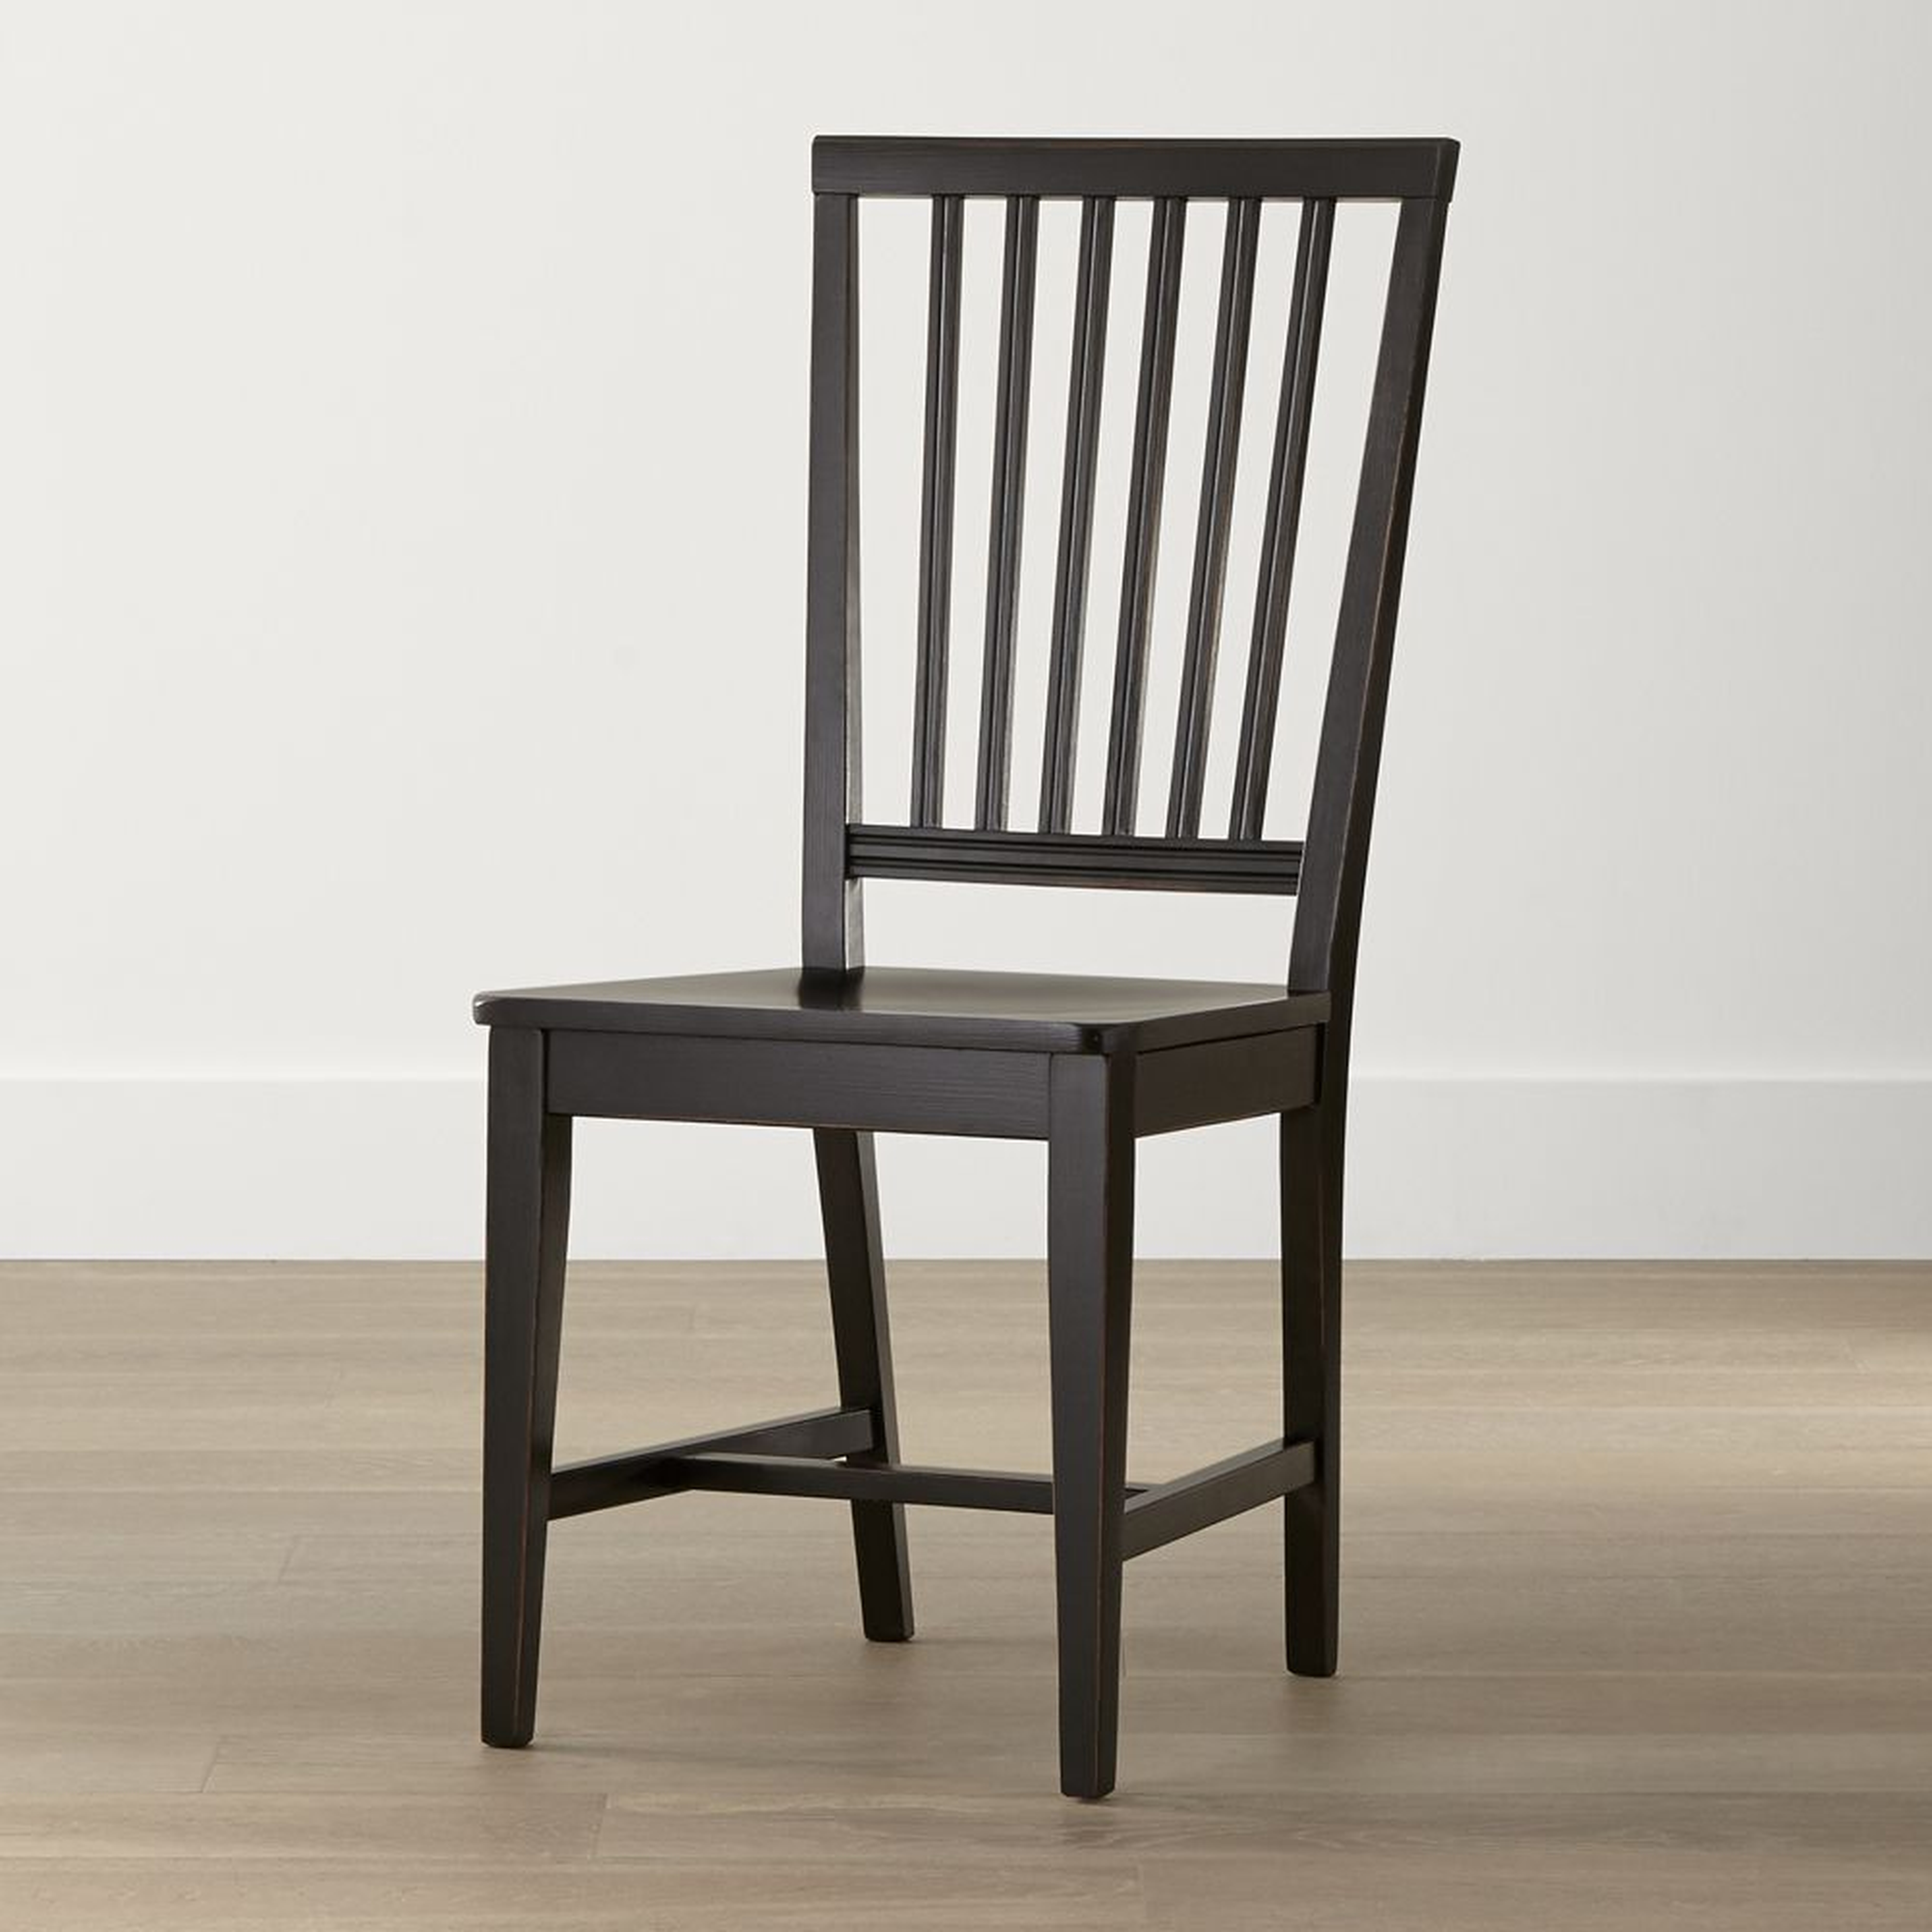 Village Bruno Black Wood Dining Chair - Crate and Barrel